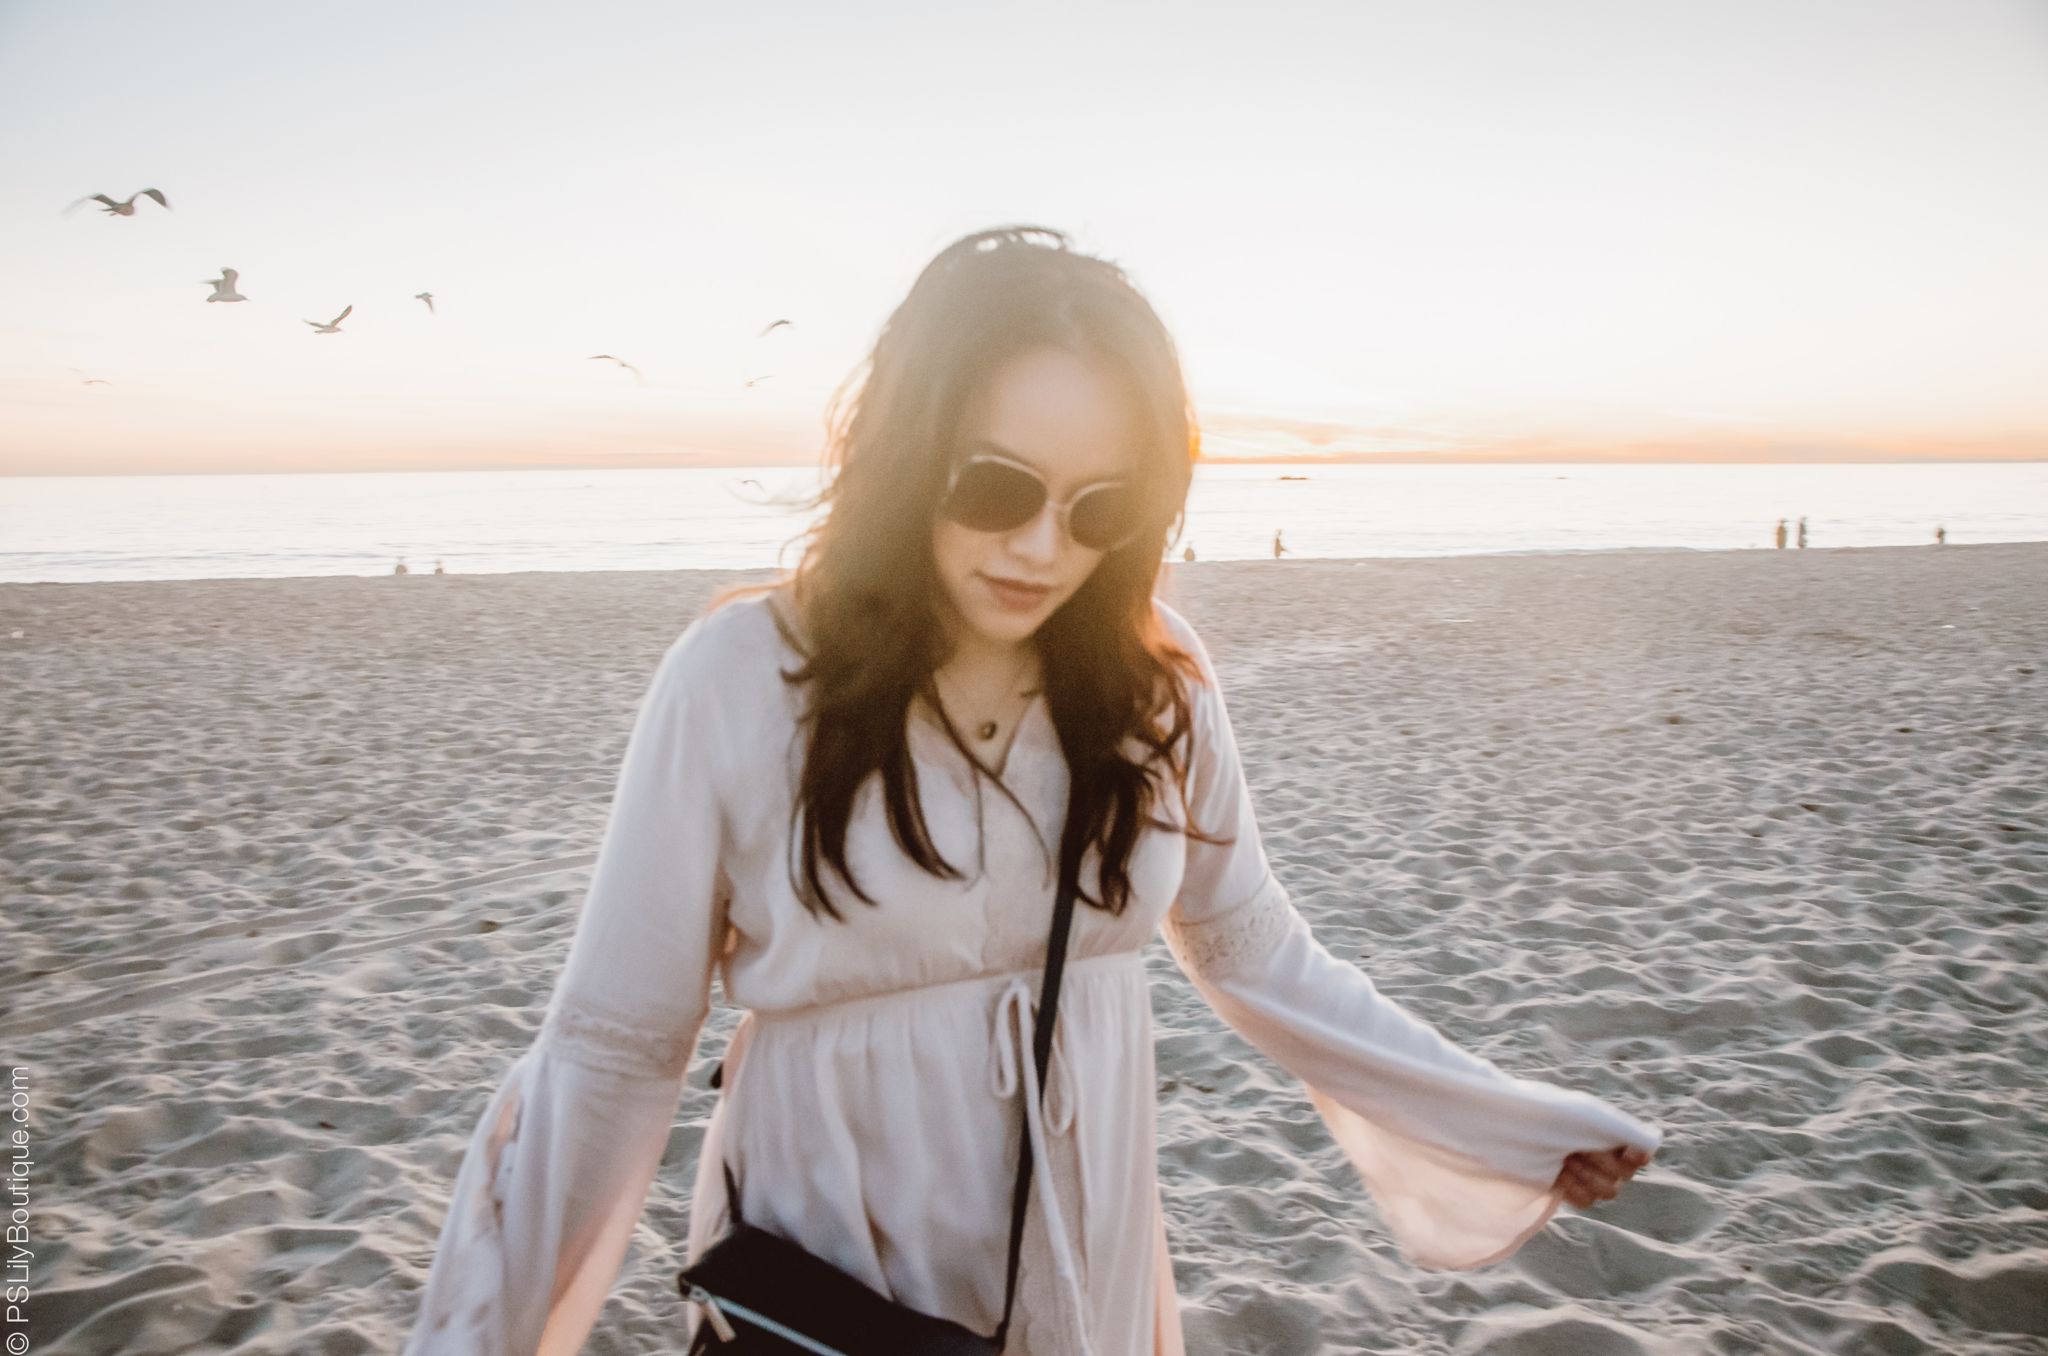 instagram-pslilyboutique-pinterest-one-fine-day-Santa-Monica-los-angeles-fashion-blogger-beach-one-fine-day-spring-2019-outfit-idea-lucky-brand-gold-sunglasses-1-29-19-33